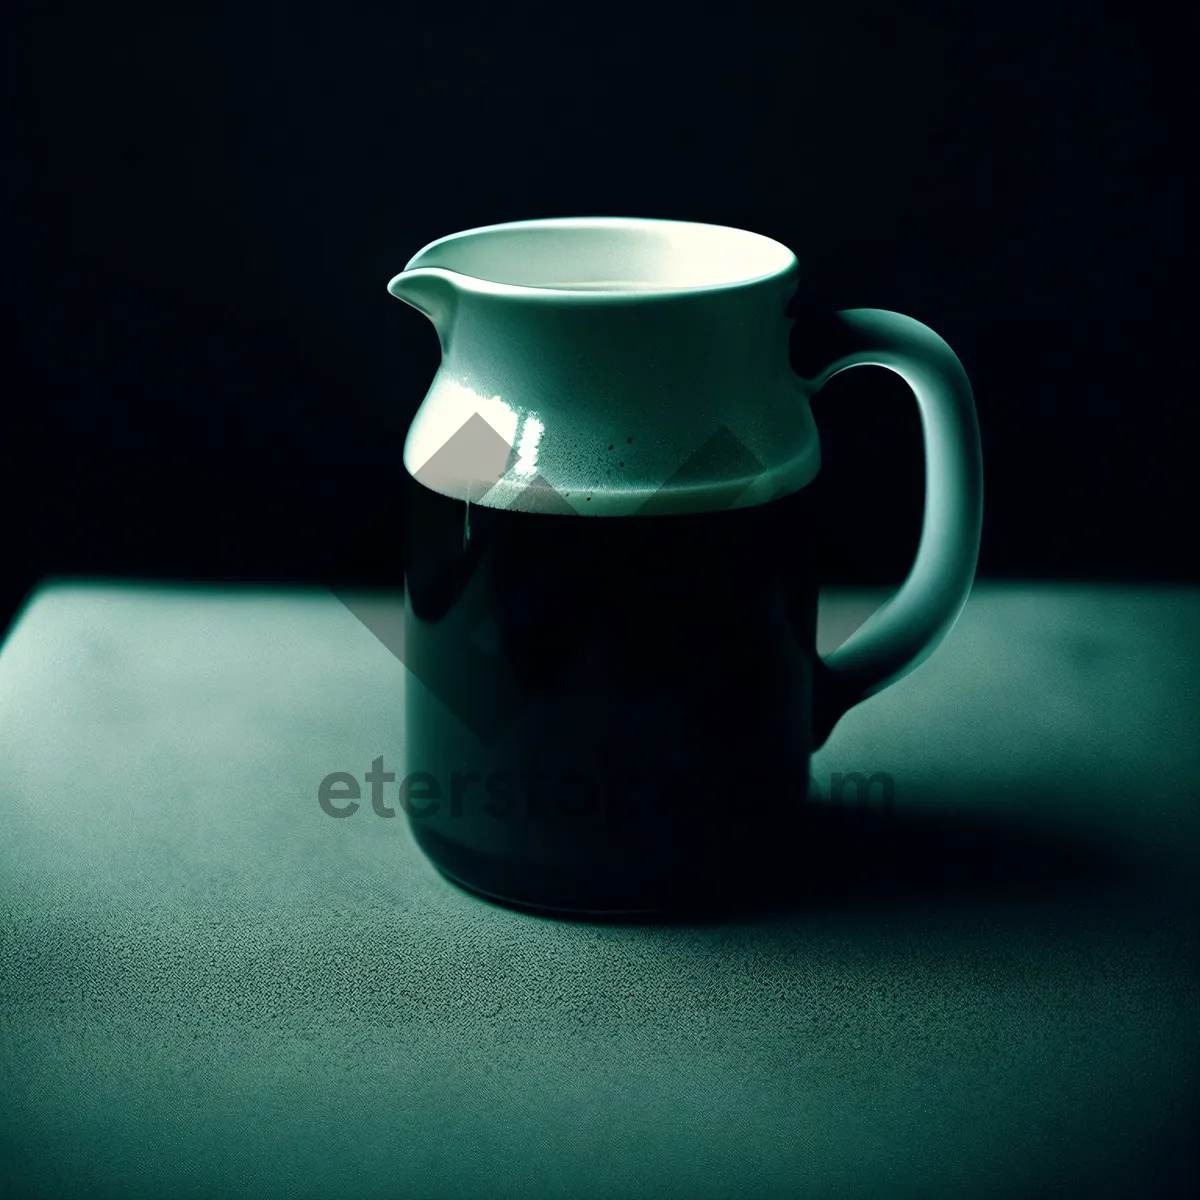 Picture of Morning Brew: Hot Coffee in Mug